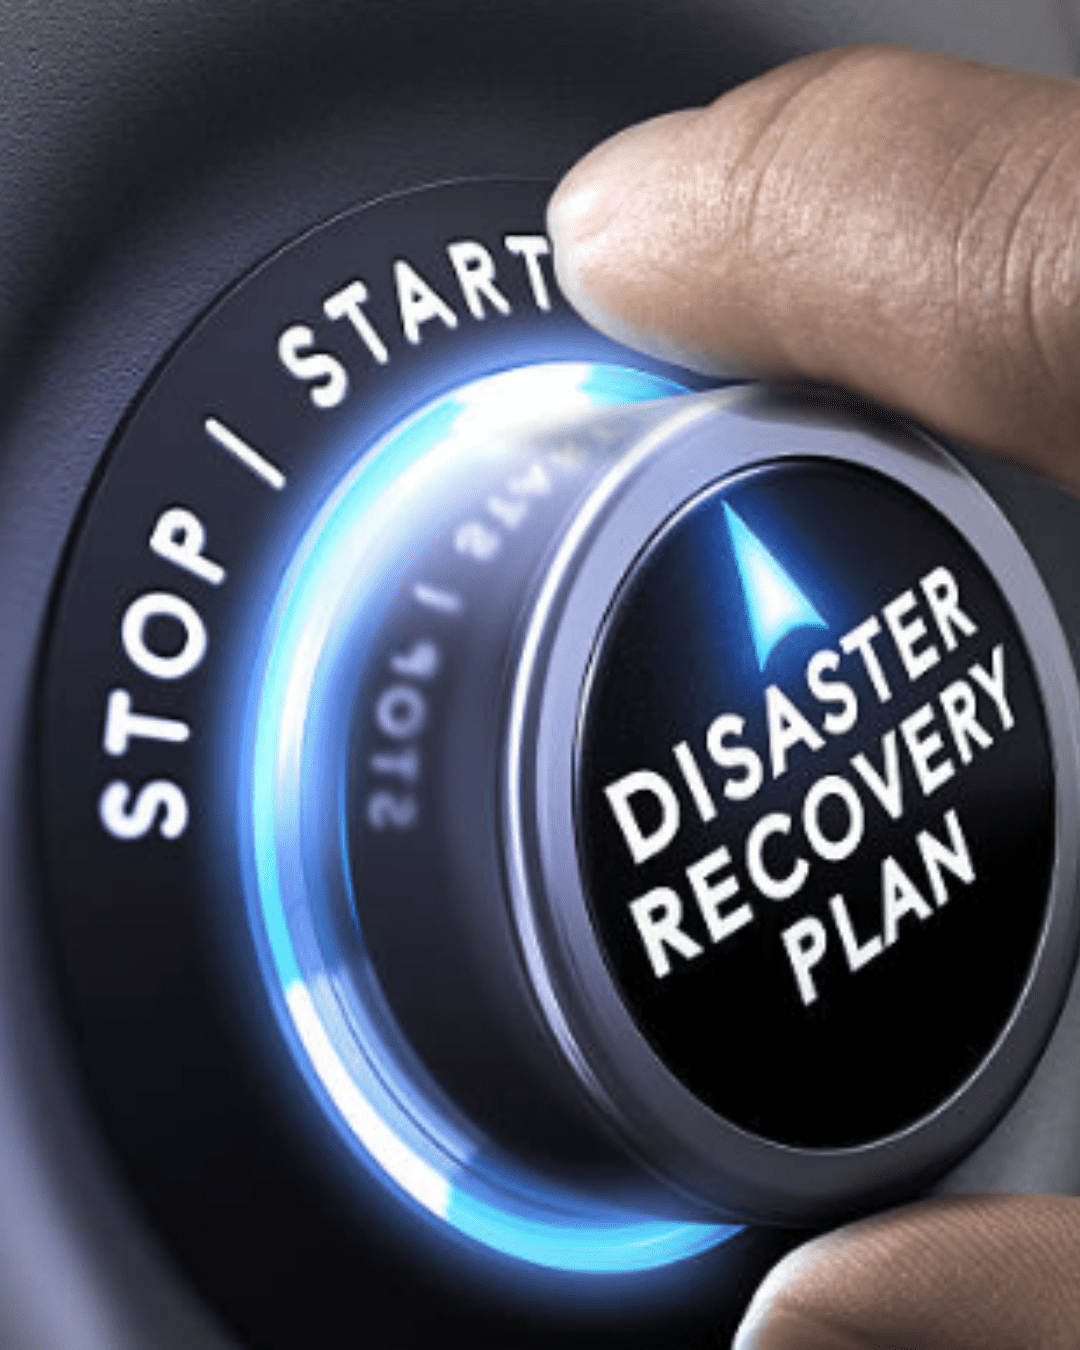 Image representing a disaster recovery plan